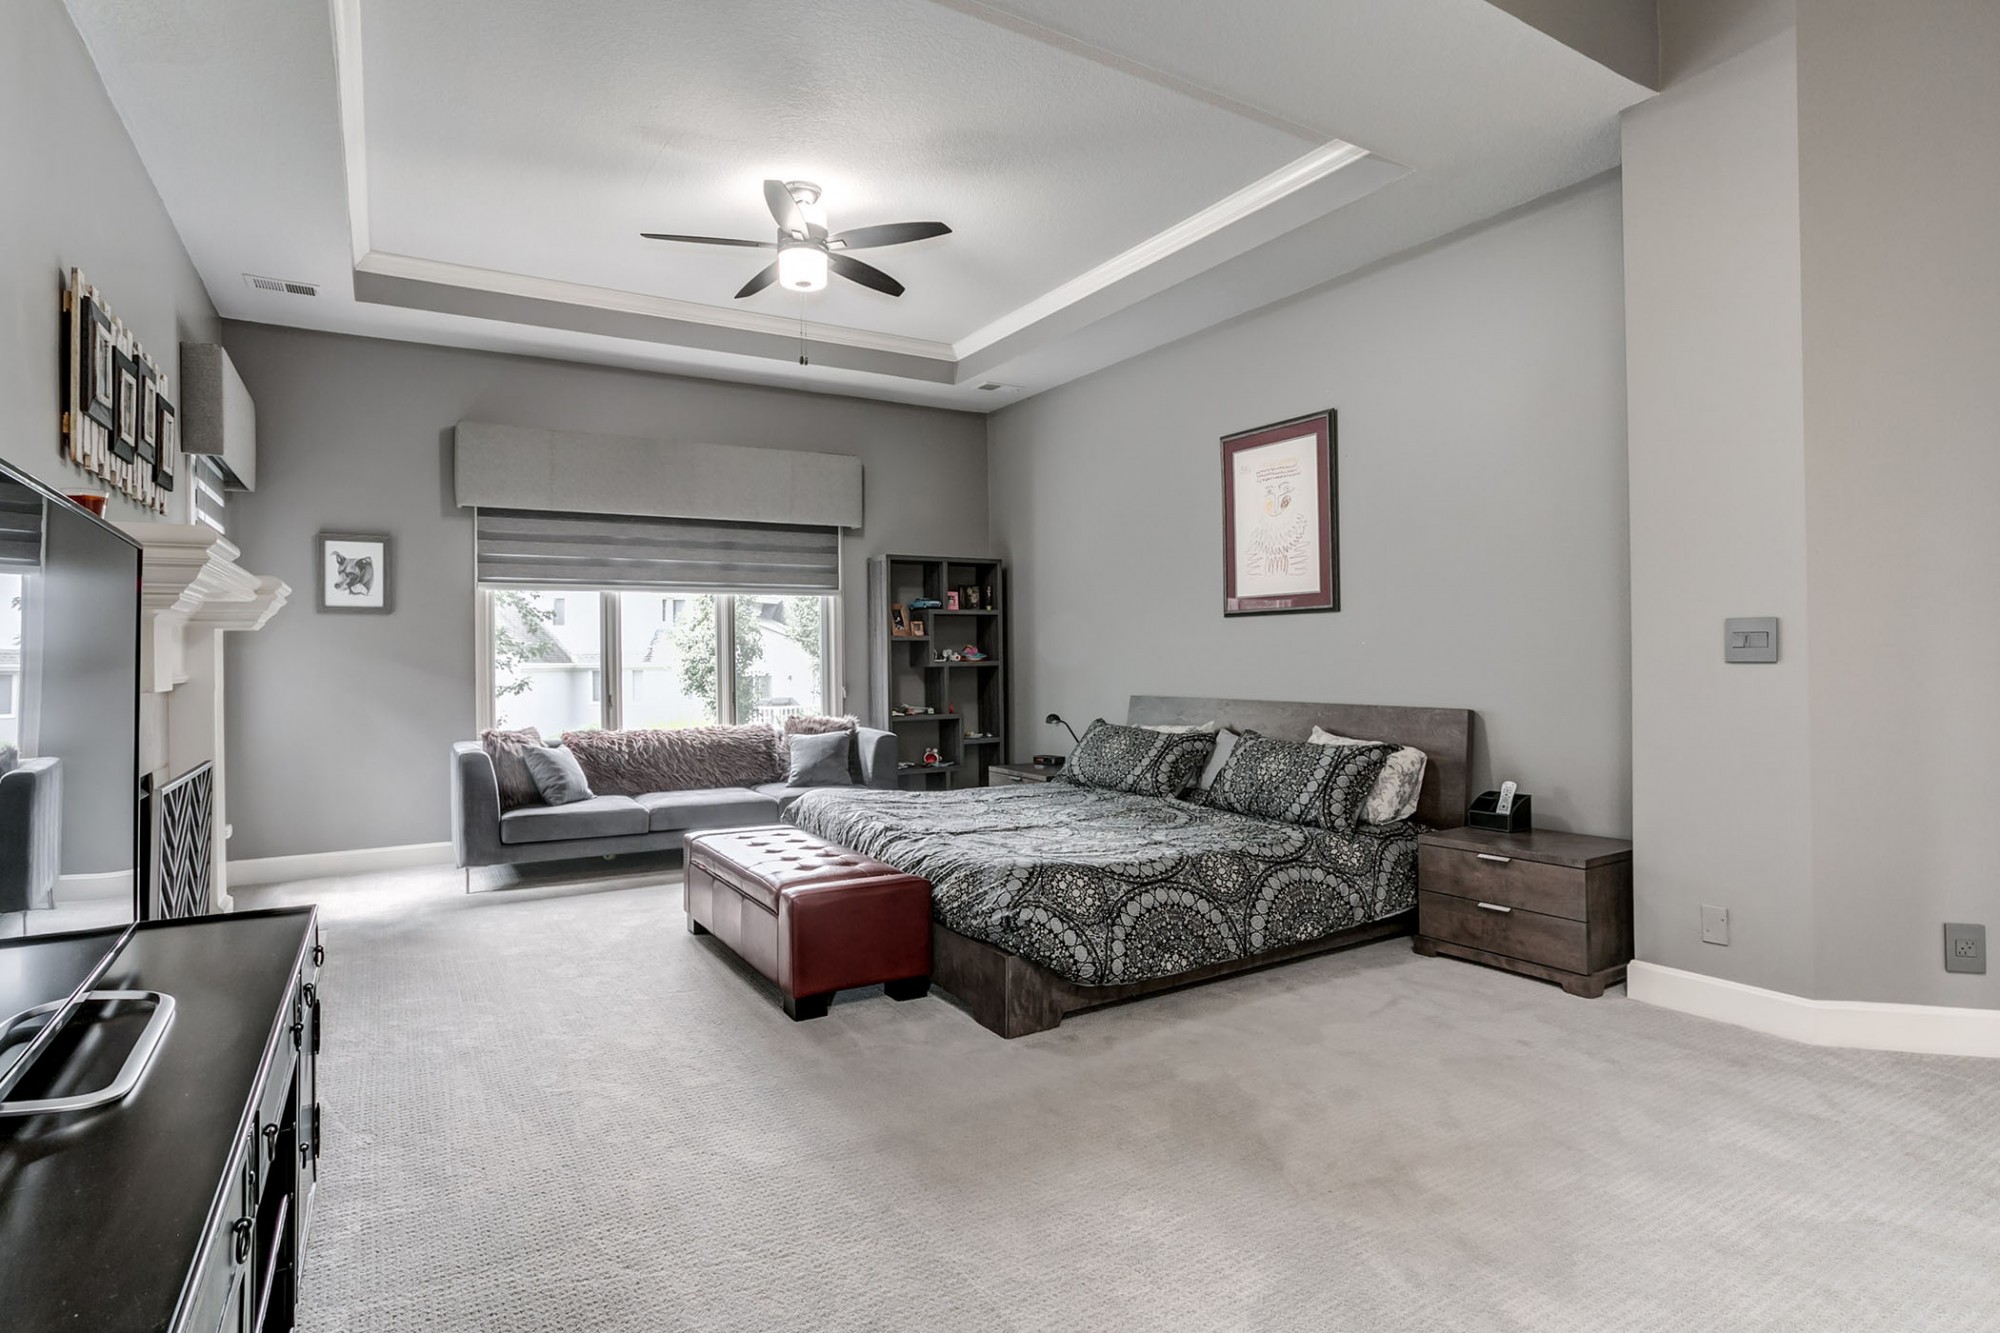 Soaring ceilings give additional spatial feel to this room.